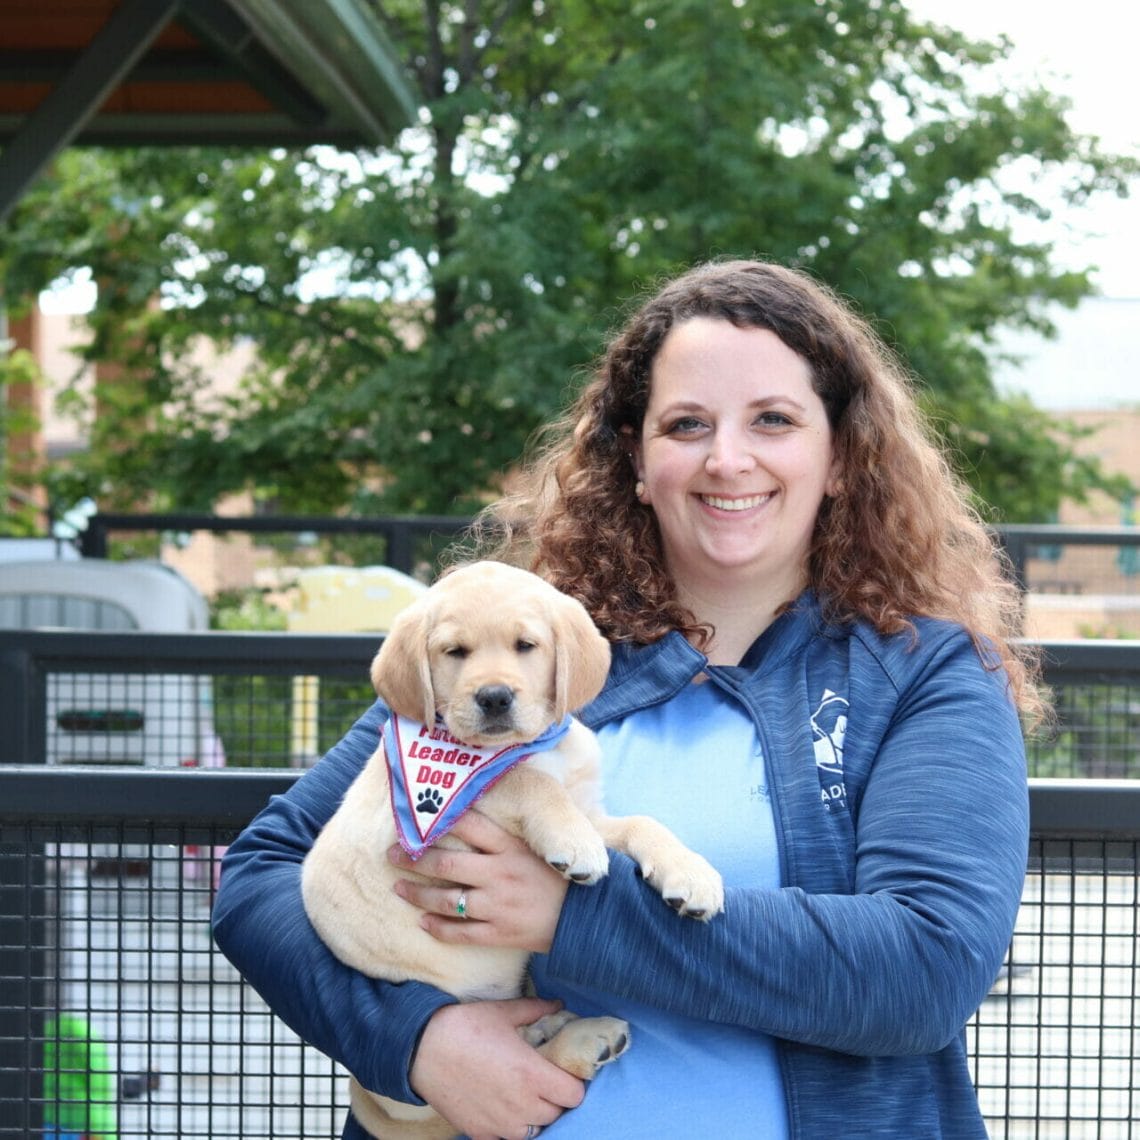 A woman in a blue Leader Dog sweater is outside holding a small yellow puppy with a future leader dog bandana